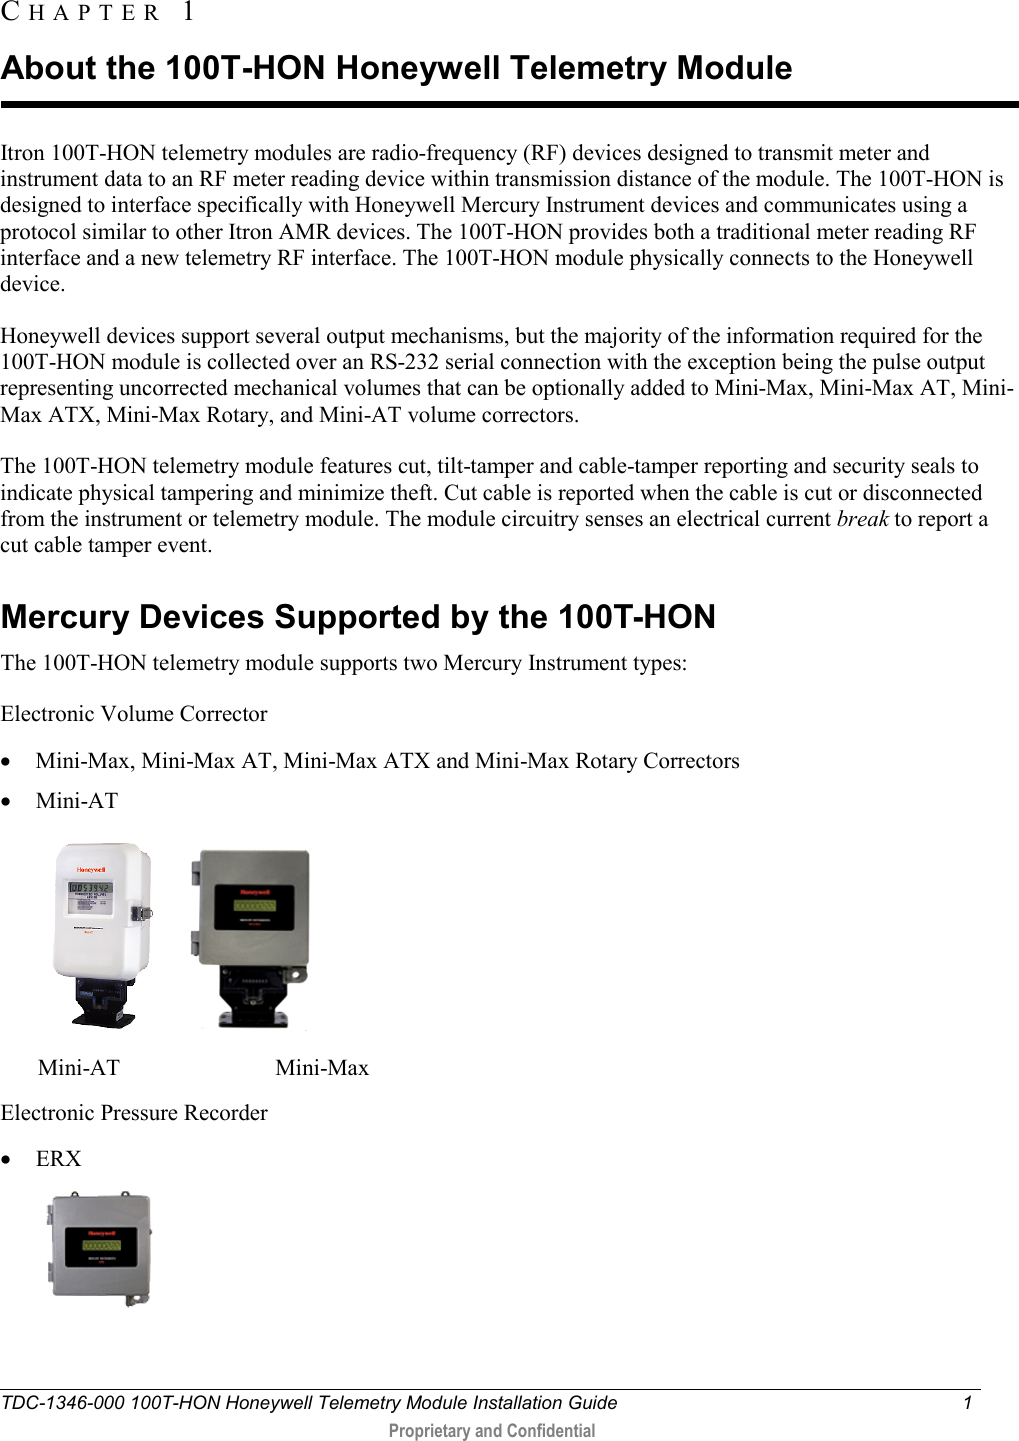  TDC-1346-000 100T-HON Honeywell Telemetry Module Installation Guide  1   Proprietary and Confidential     Itron 100T-HON telemetry modules are radio-frequency (RF) devices designed to transmit meter and instrument data to an RF meter reading device within transmission distance of the module. The 100T-HON is designed to interface specifically with Honeywell Mercury Instrument devices and communicates using a protocol similar to other Itron AMR devices. The 100T-HON provides both a traditional meter reading RF interface and a new telemetry RF interface. The 100T-HON module physically connects to the Honeywell device.  Honeywell devices support several output mechanisms, but the majority of the information required for the 100T-HON module is collected over an RS-232 serial connection with the exception being the pulse output representing uncorrected mechanical volumes that can be optionally added to Mini-Max, Mini-Max AT, Mini-Max ATX, Mini-Max Rotary, and Mini-AT volume correctors. The 100T-HON telemetry module features cut, tilt-tamper and cable-tamper reporting and security seals to indicate physical tampering and minimize theft. Cut cable is reported when the cable is cut or disconnected from the instrument or telemetry module. The module circuitry senses an electrical current break to report a cut cable tamper event.   Mercury Devices Supported by the 100T-HON The 100T-HON telemetry module supports two Mercury Instrument types: Electronic Volume Corrector • Mini-Max, Mini-Max AT, Mini-Max ATX and Mini-Max Rotary Correctors • Mini-AT    Mini-AT                           Mini-Max Electronic Pressure Recorder • ERX  CHAPTER  1  About the 100T-HON Honeywell Telemetry Module 